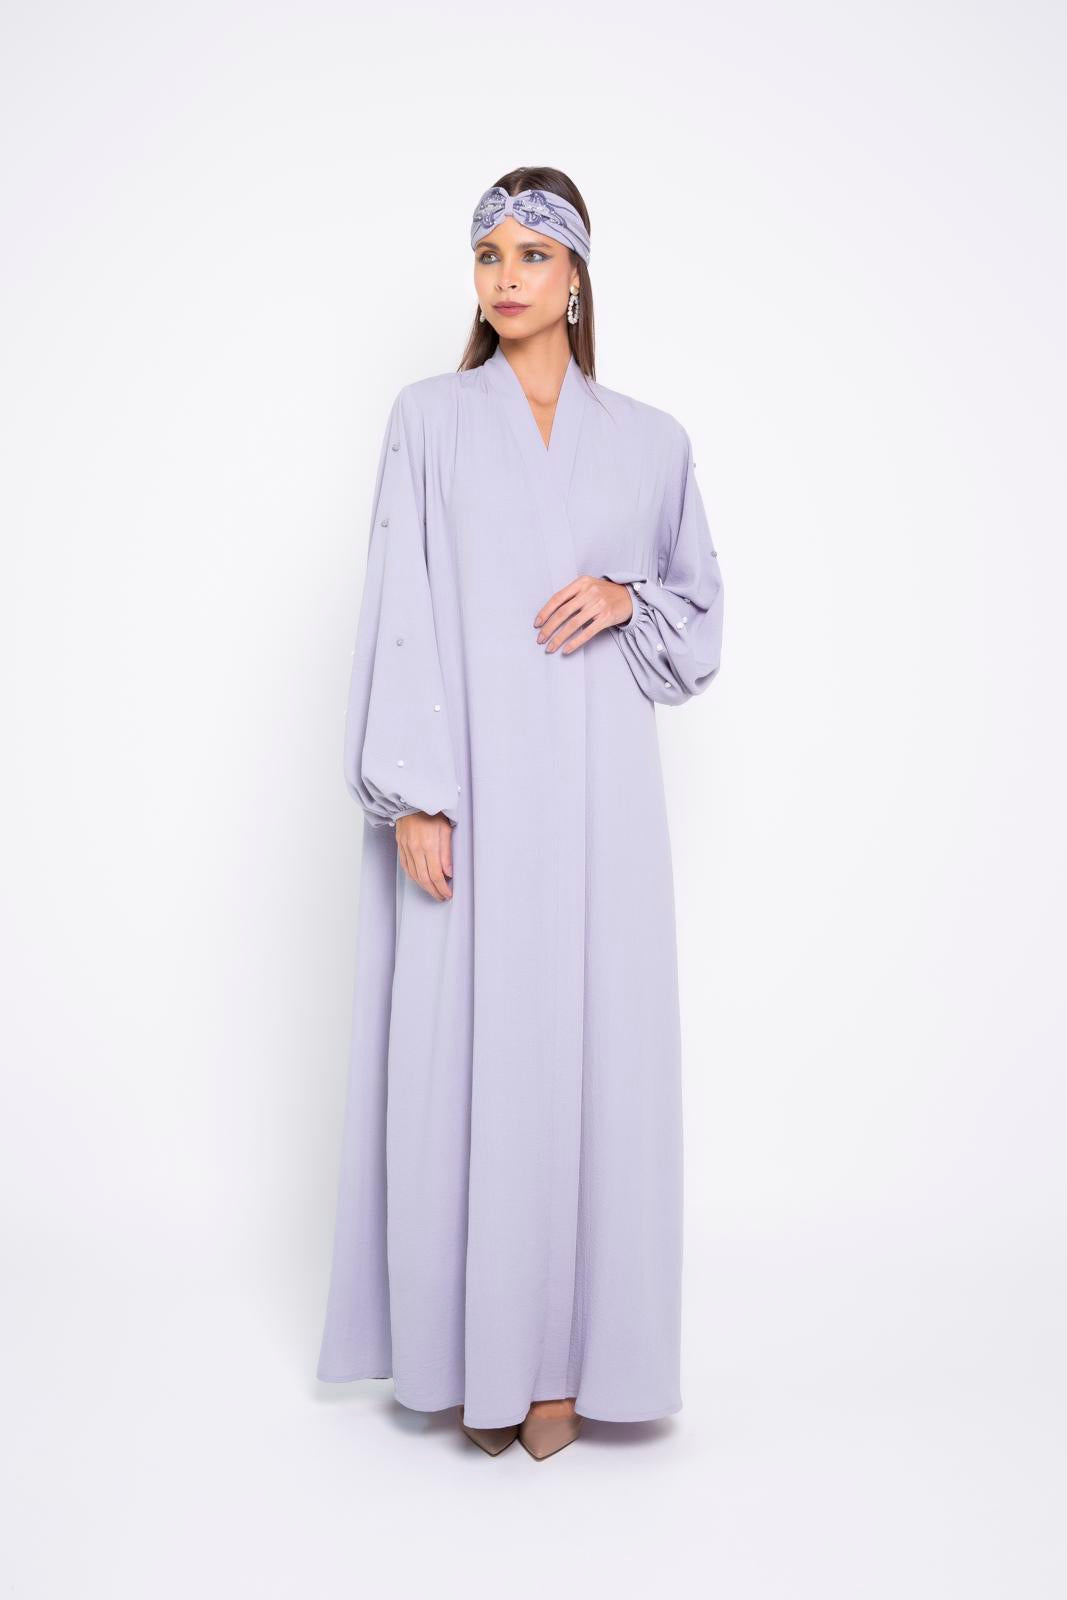 Linen abaya with puffy cuff sleeves